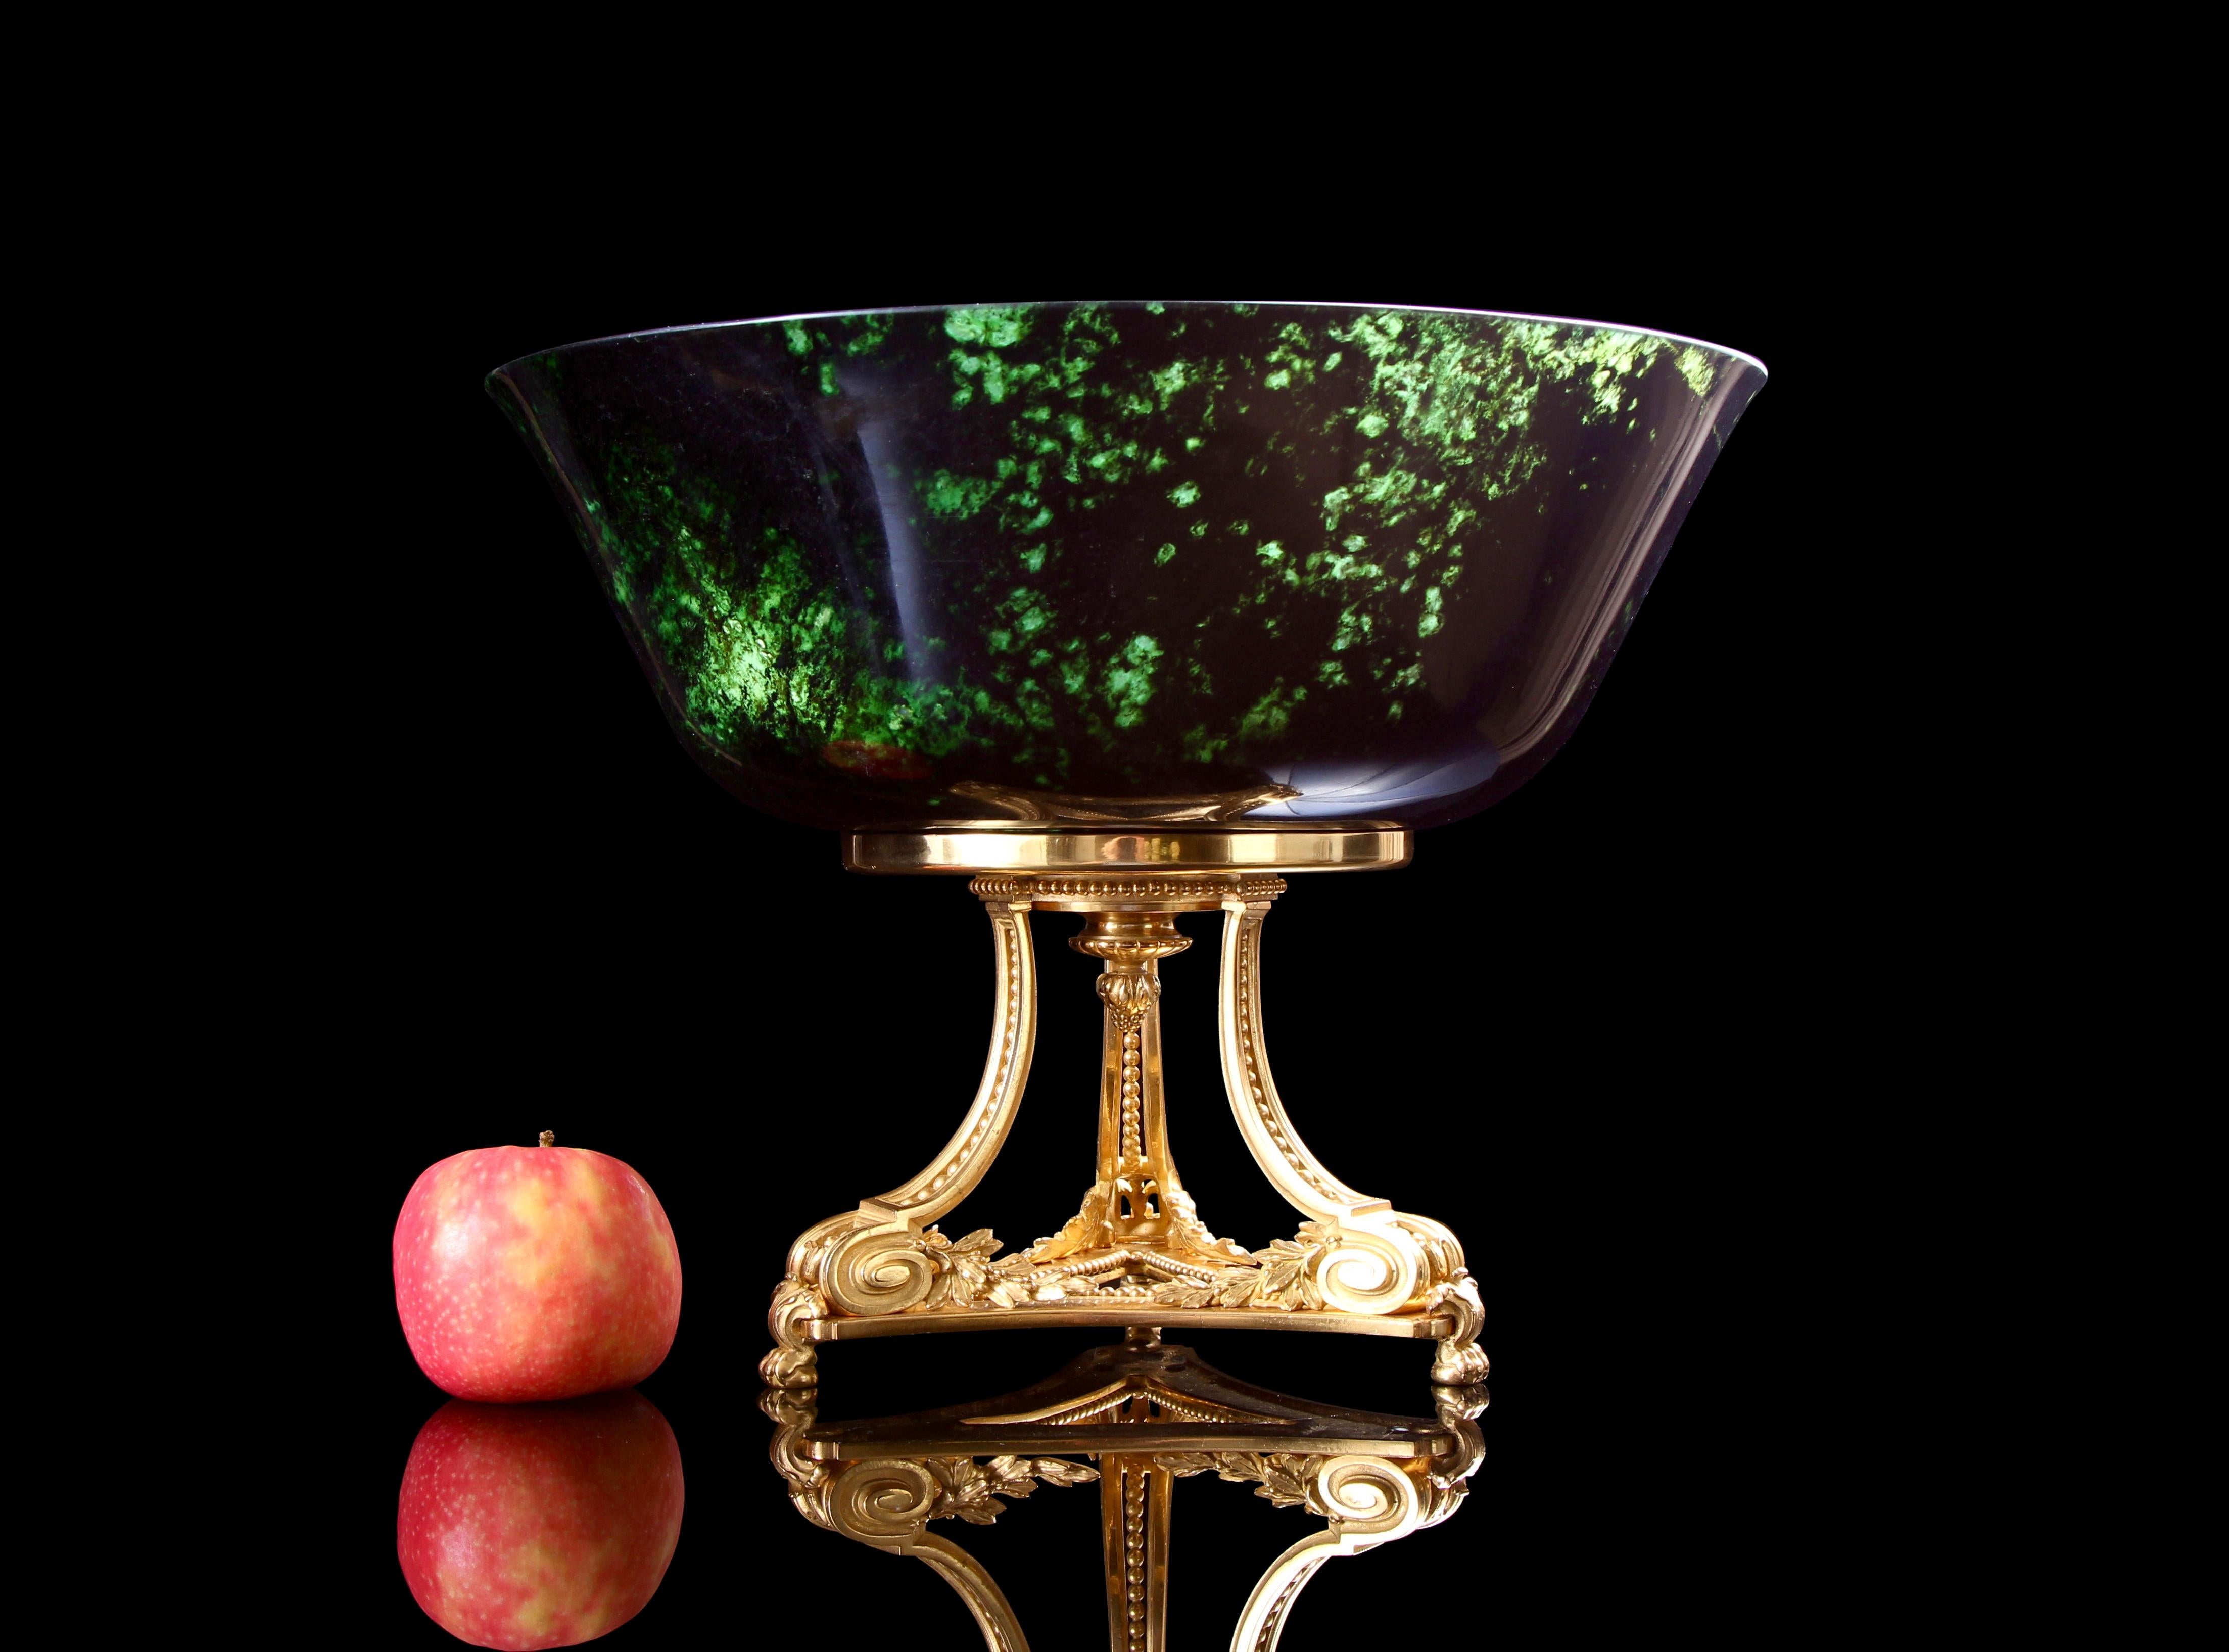 18th Century Qianlong Spinach Green Jade Bowl On 19th Century Gilt Bronze In Good Condition For Sale In London, by appointment only